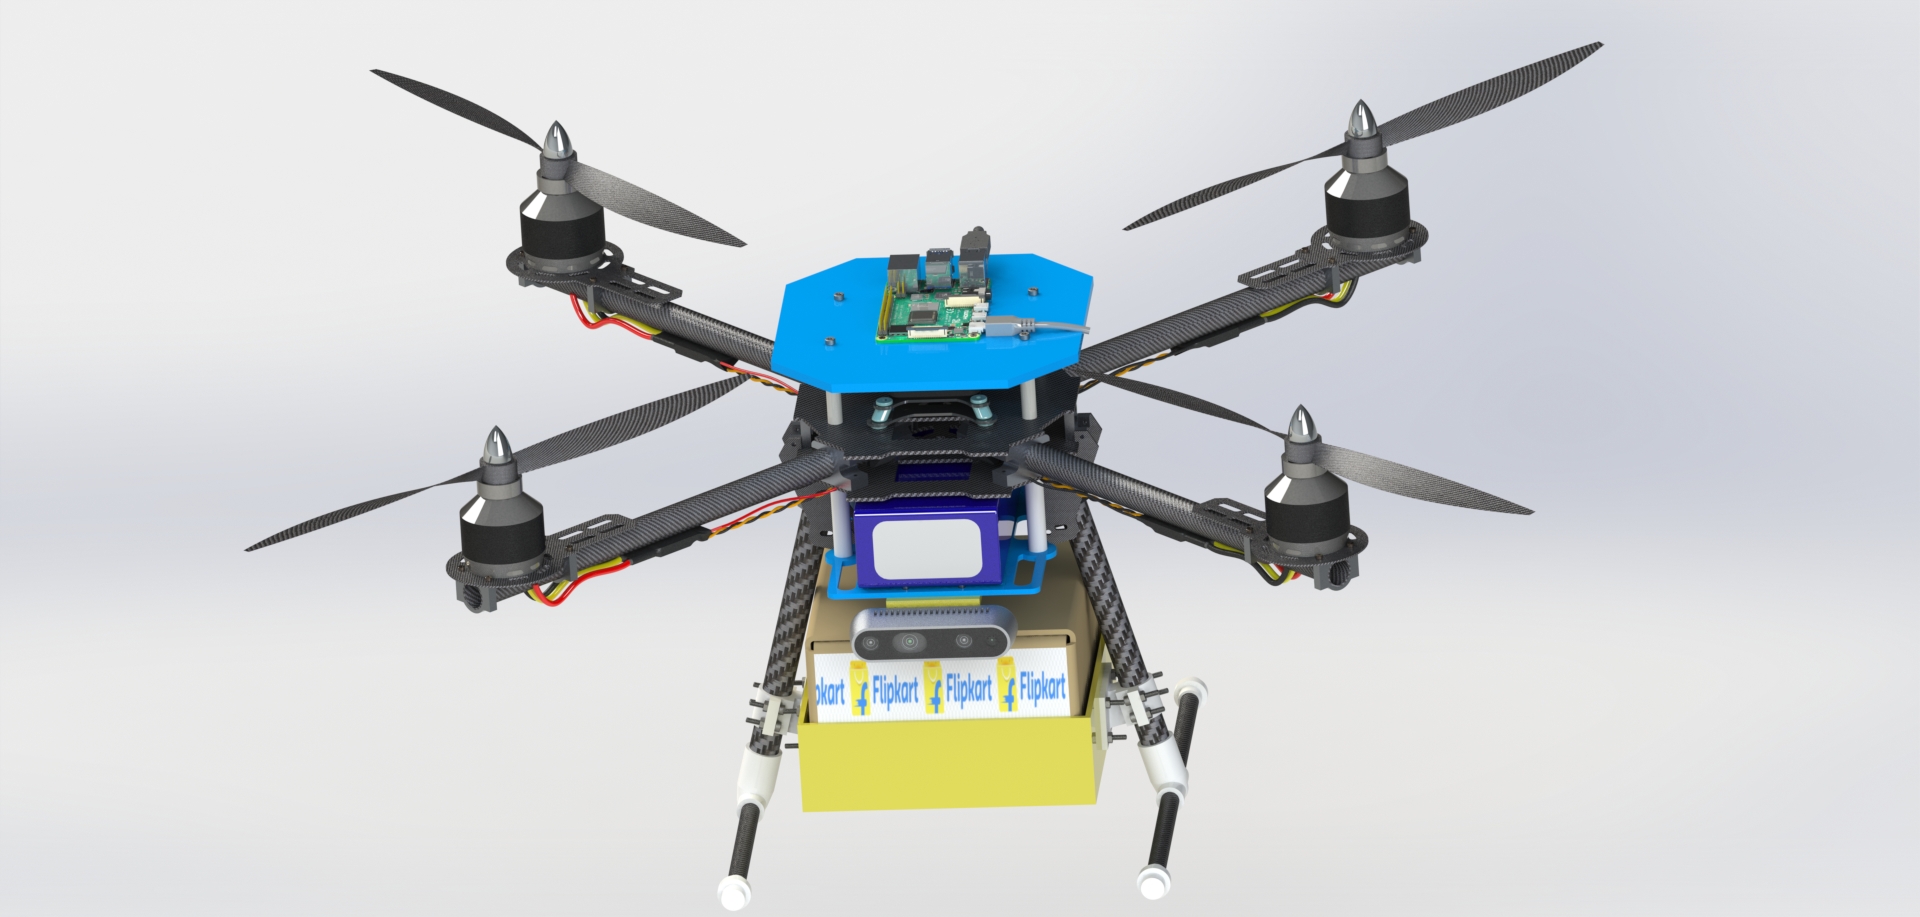 Capable of autonomous indoor navigation and having a payload capacity of 2.4 kgs, team UMIC Aerial proposed this design for the Flipkart Grid 2.0 Autonomous Indoor Drone Robotics Challenge